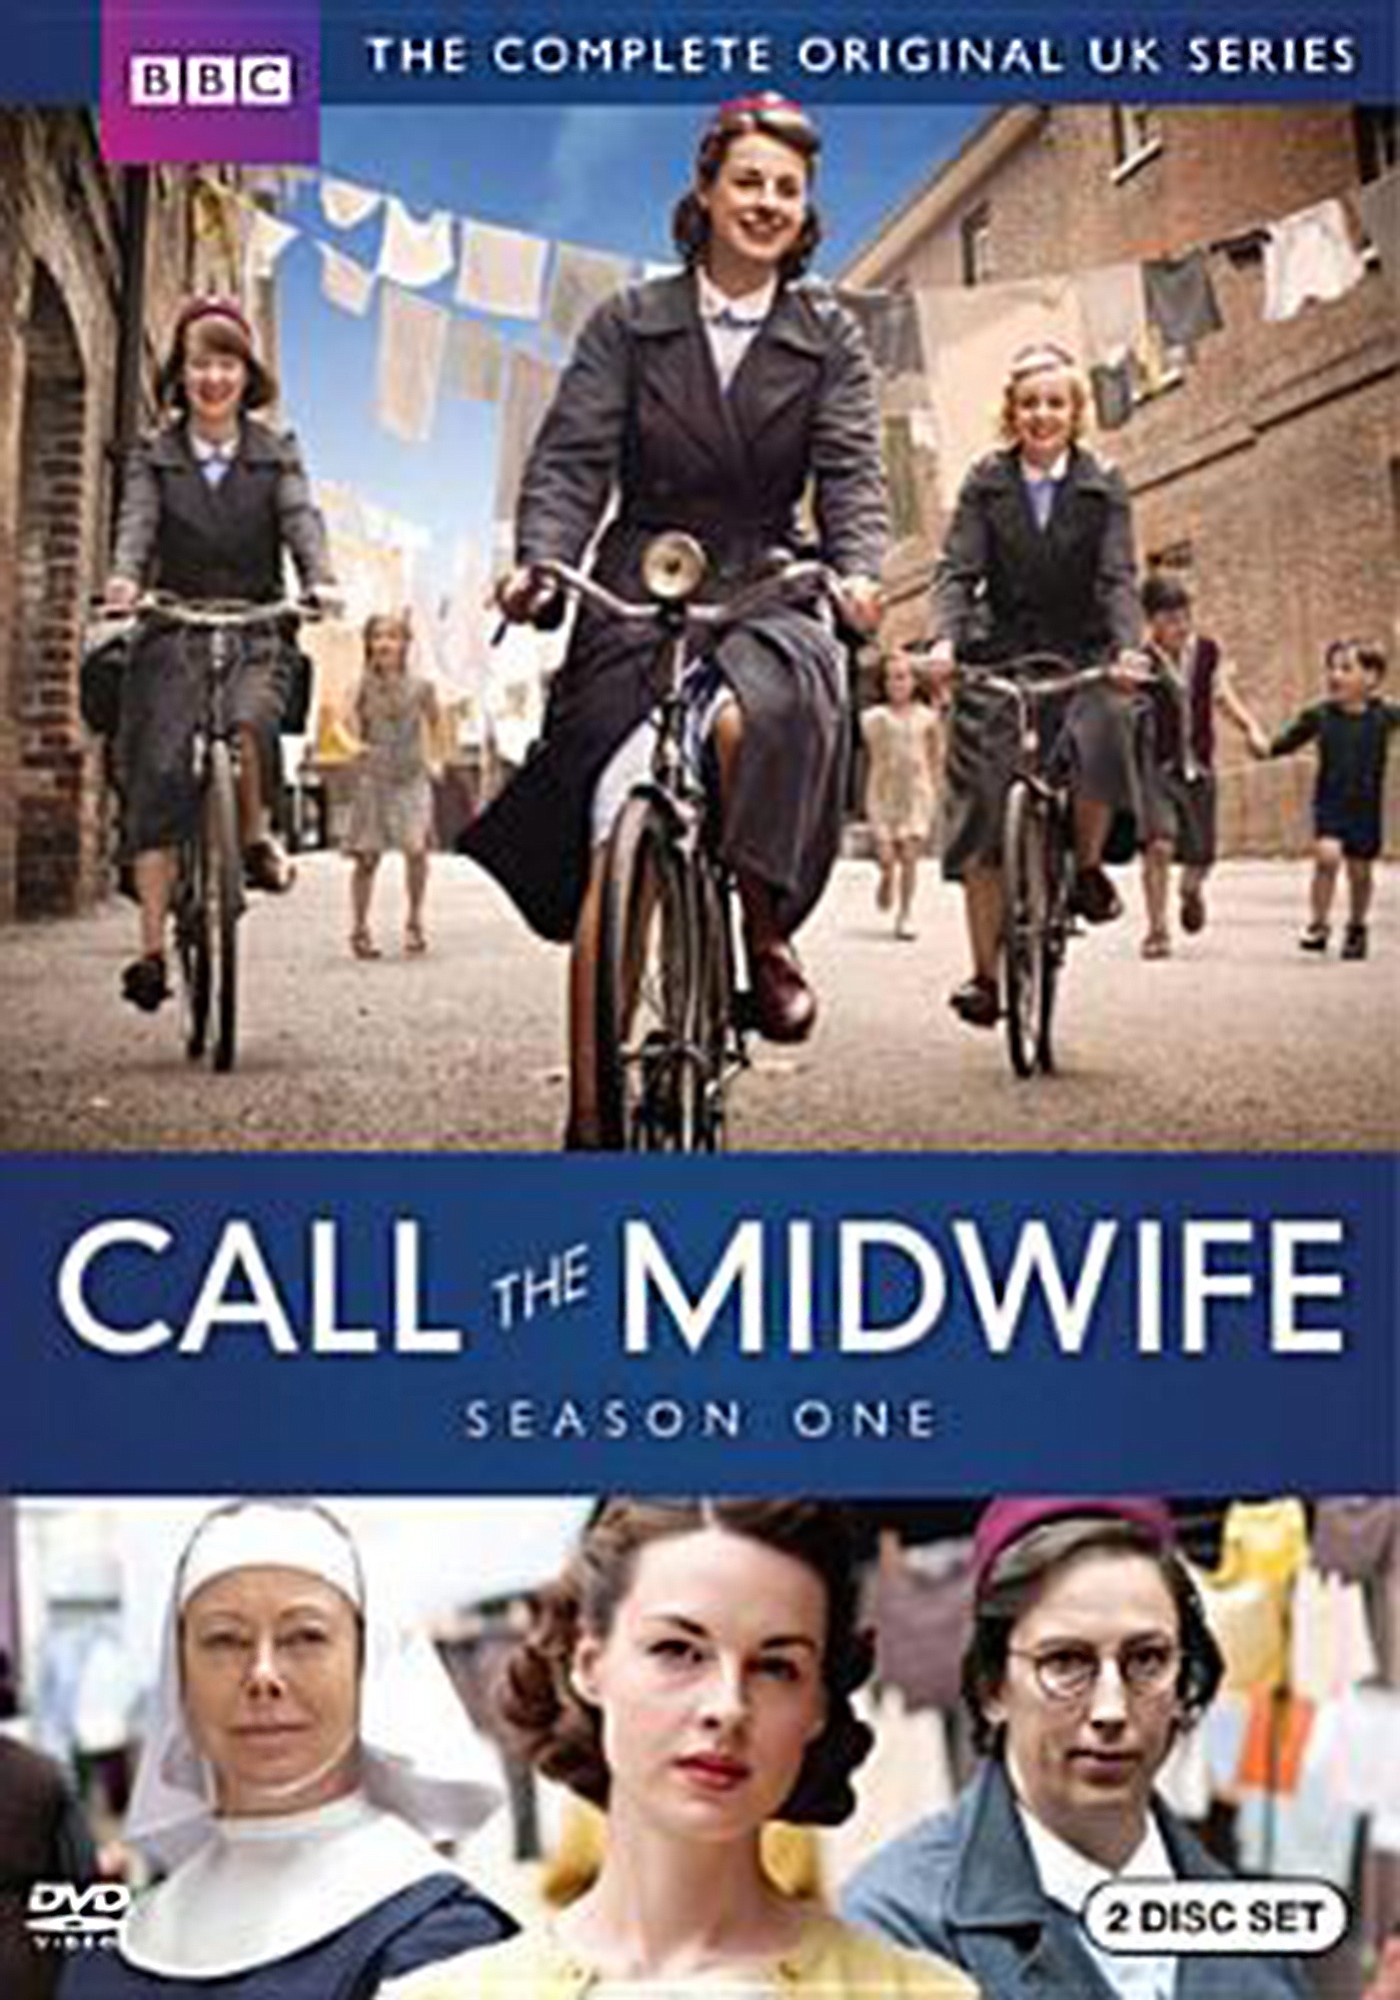 Review: &quot;Call the Midwife, Season One,&quot; directed by Philippa Lowthorpe and Jamie Payne (Warner Home Video, 2 discs, 355 minutes)